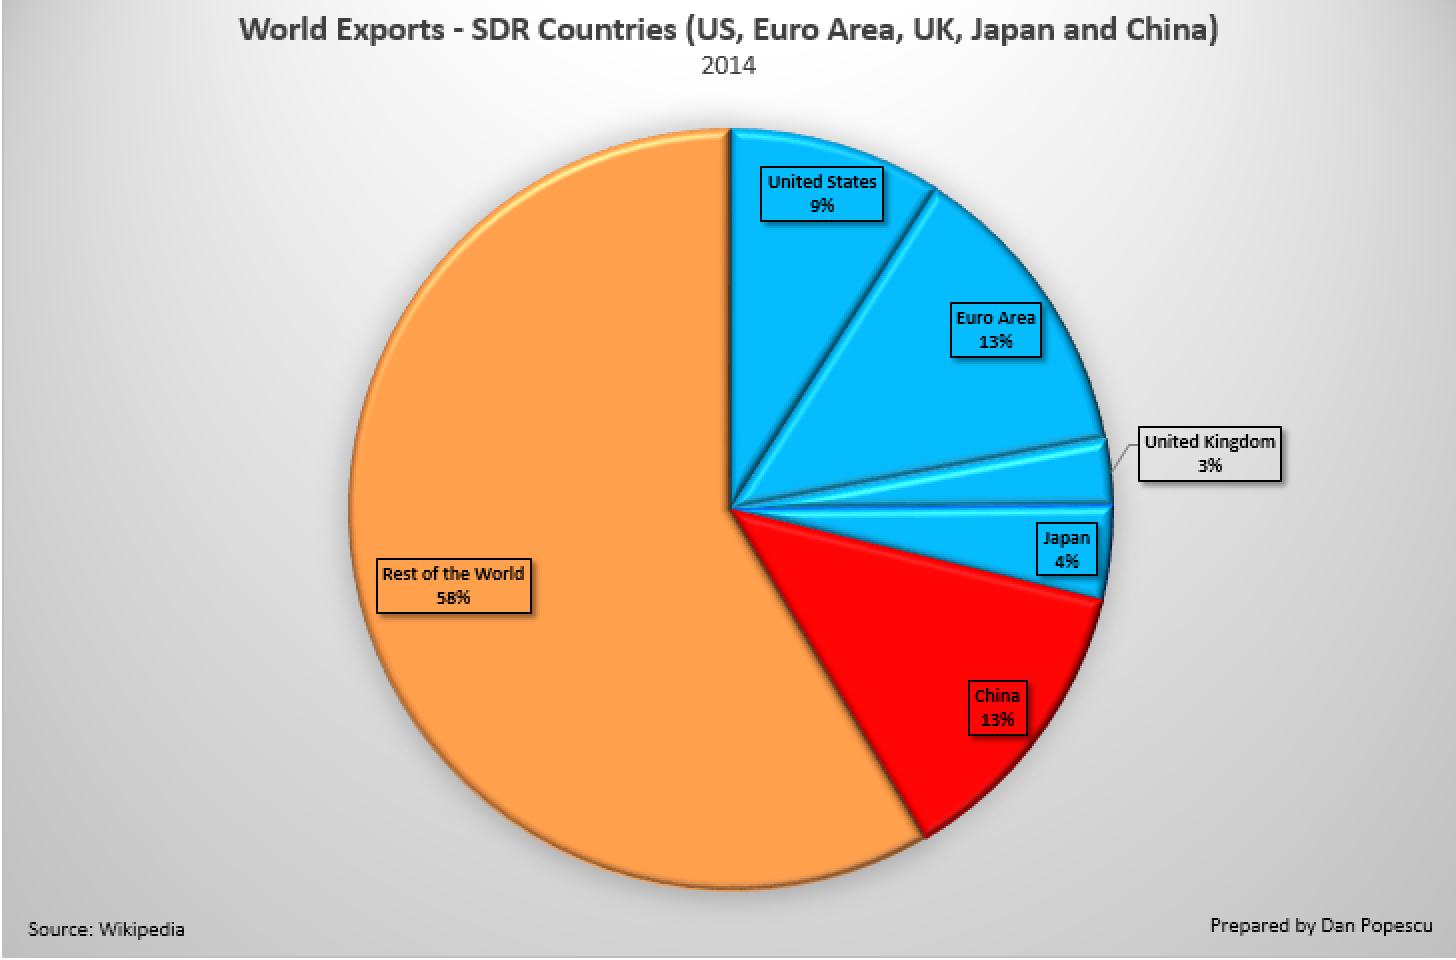 World Exports - SDR Countries 